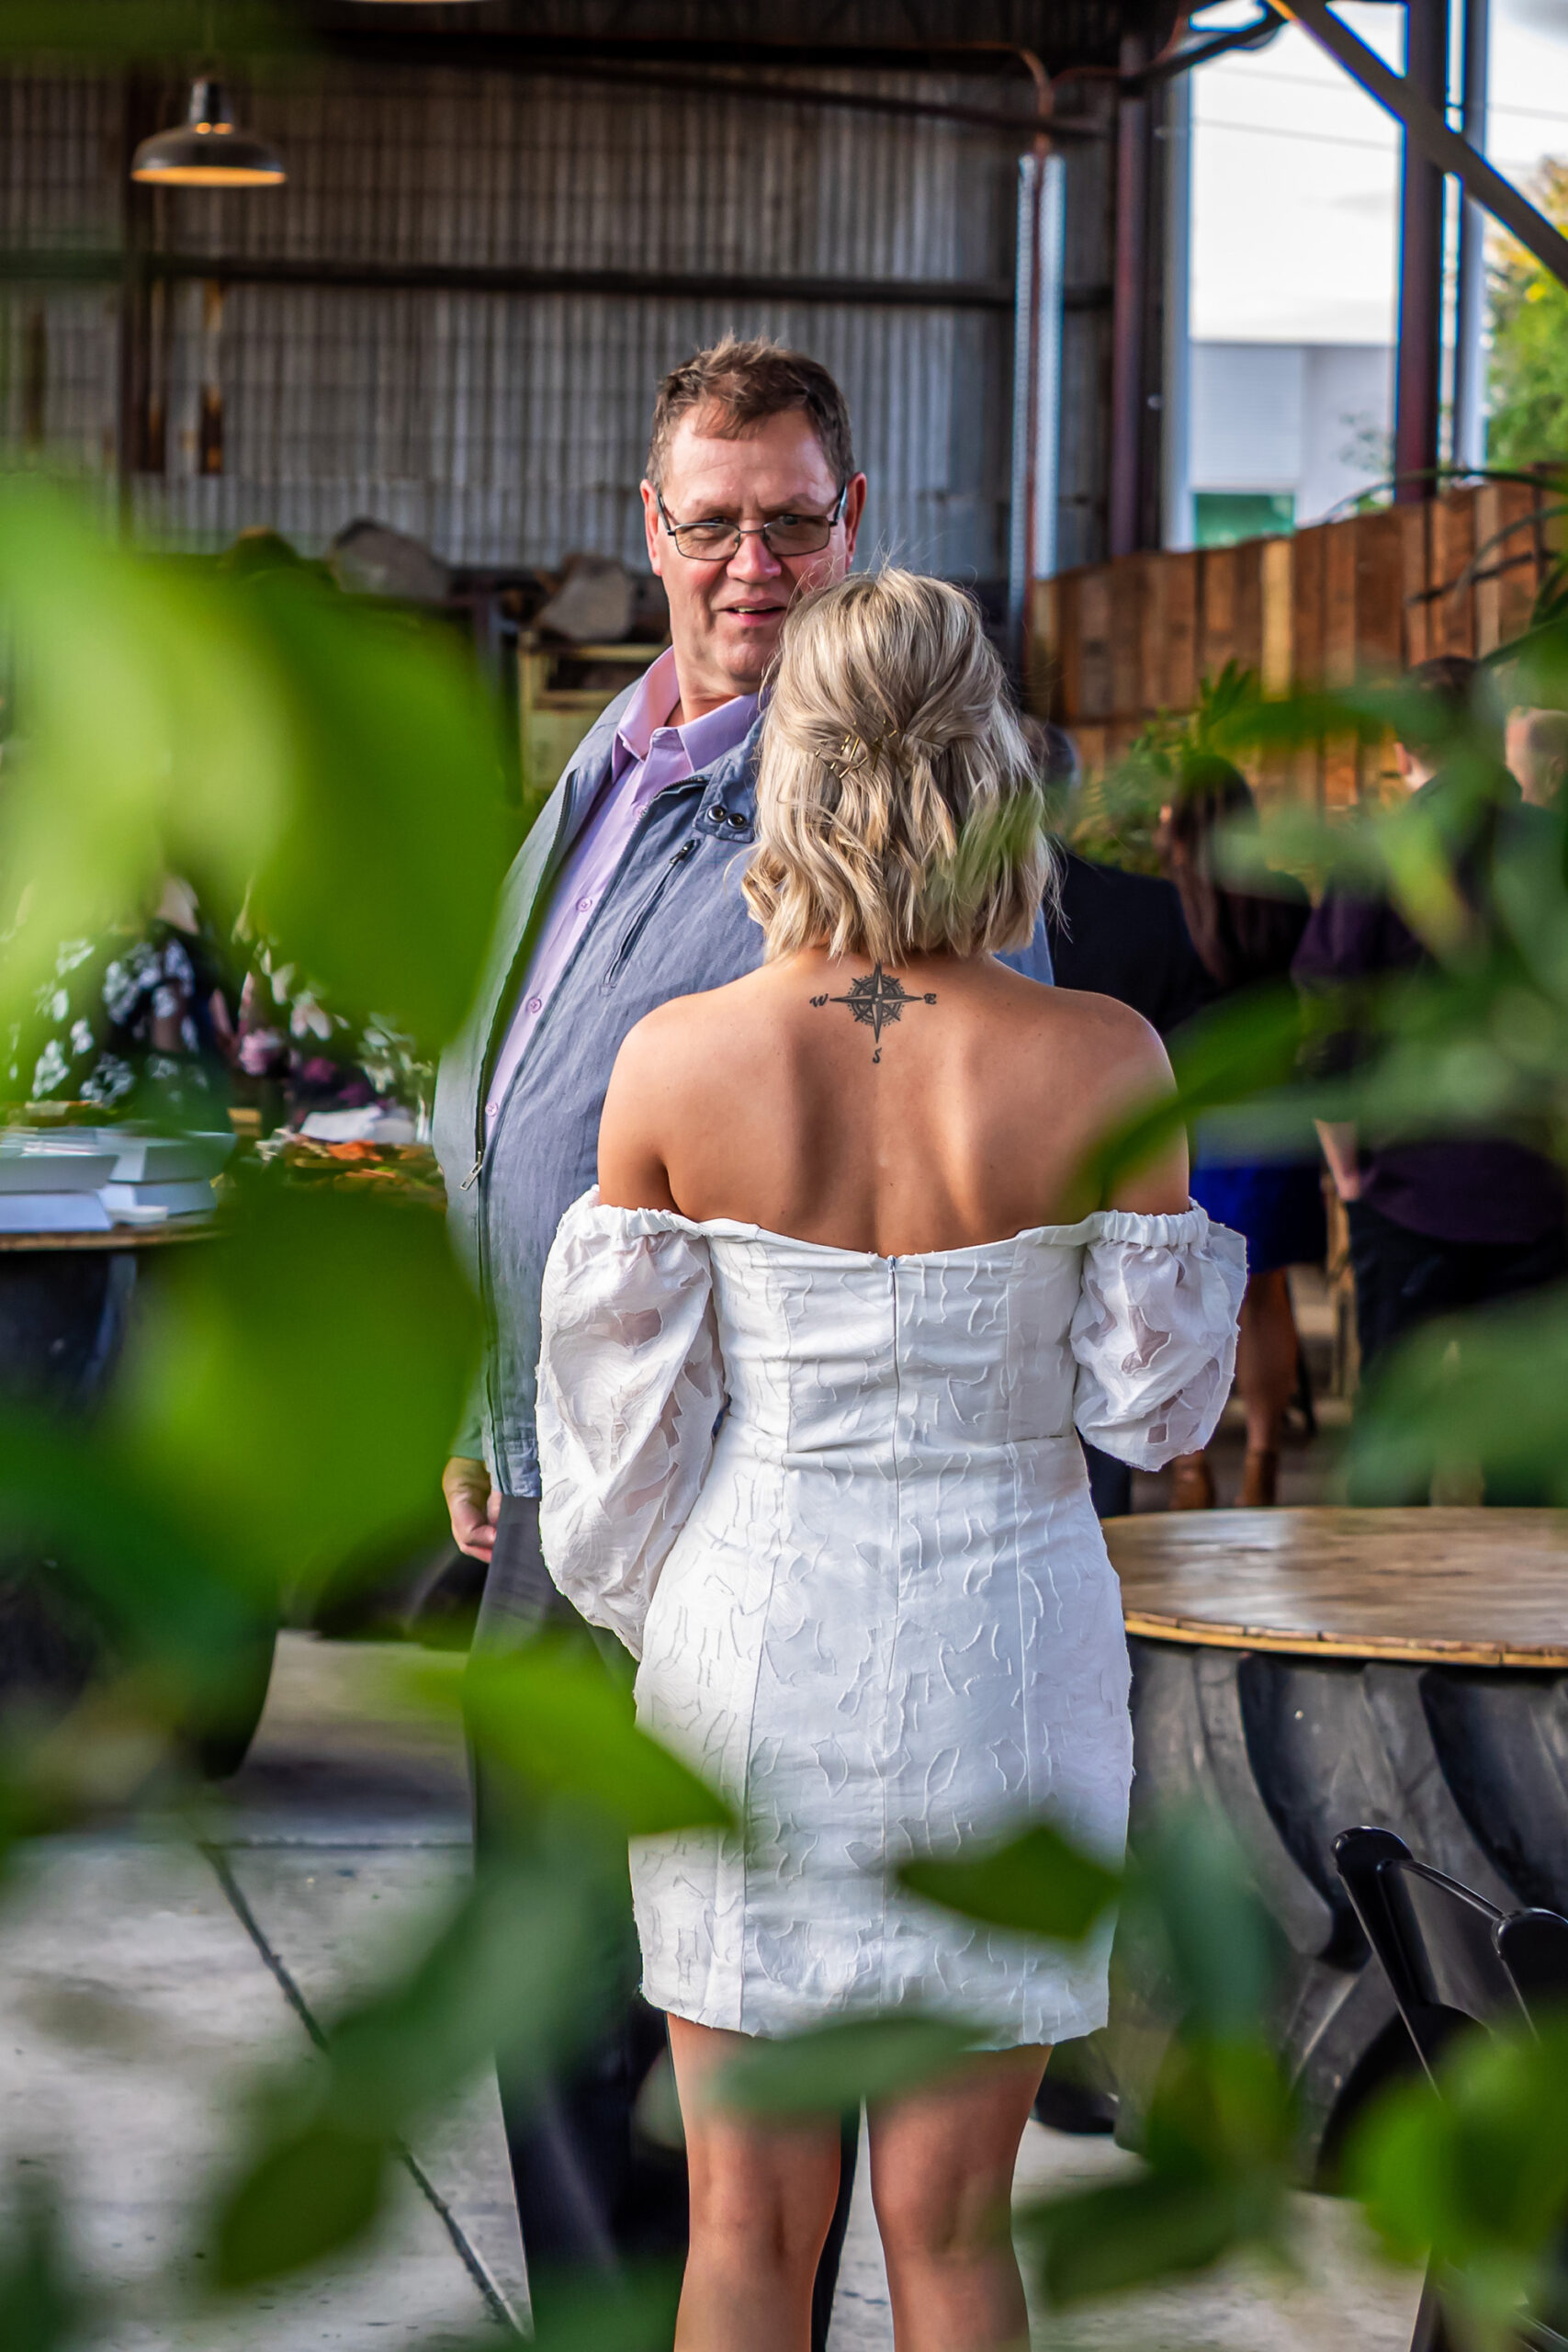 Stacey Lucas Rustic Industrial Wedding SR Photography SBS 005 scaled